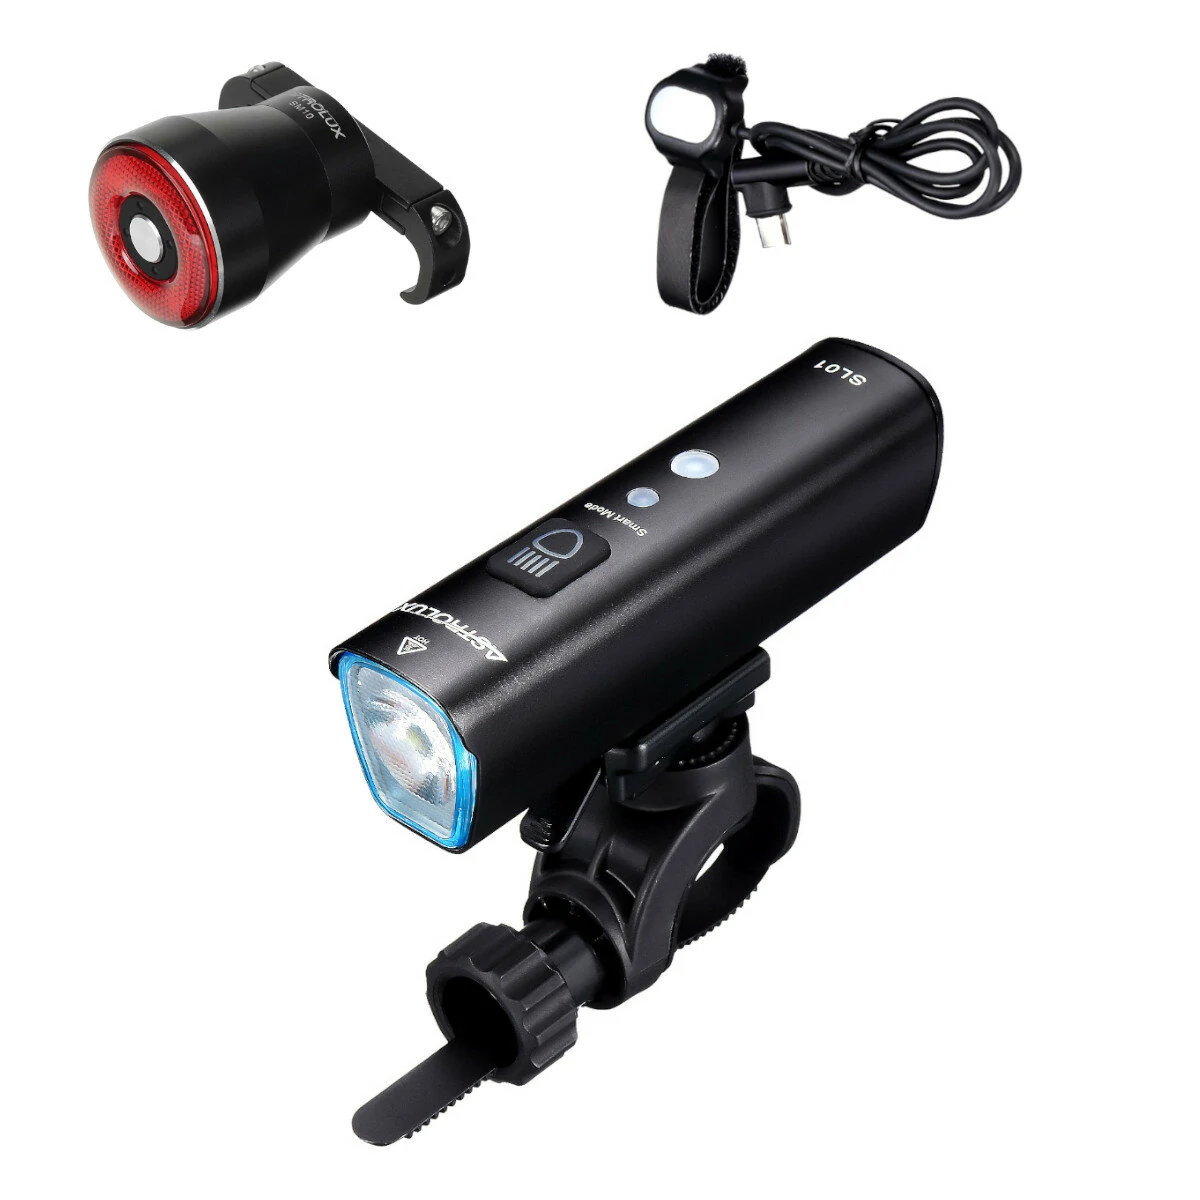 Astrolux Bike Light Set with SL01 1000lm Smart Vibration Sensing Headlight Front Lamp and SM10 Smart Brake Sensing Bicycle Taillight